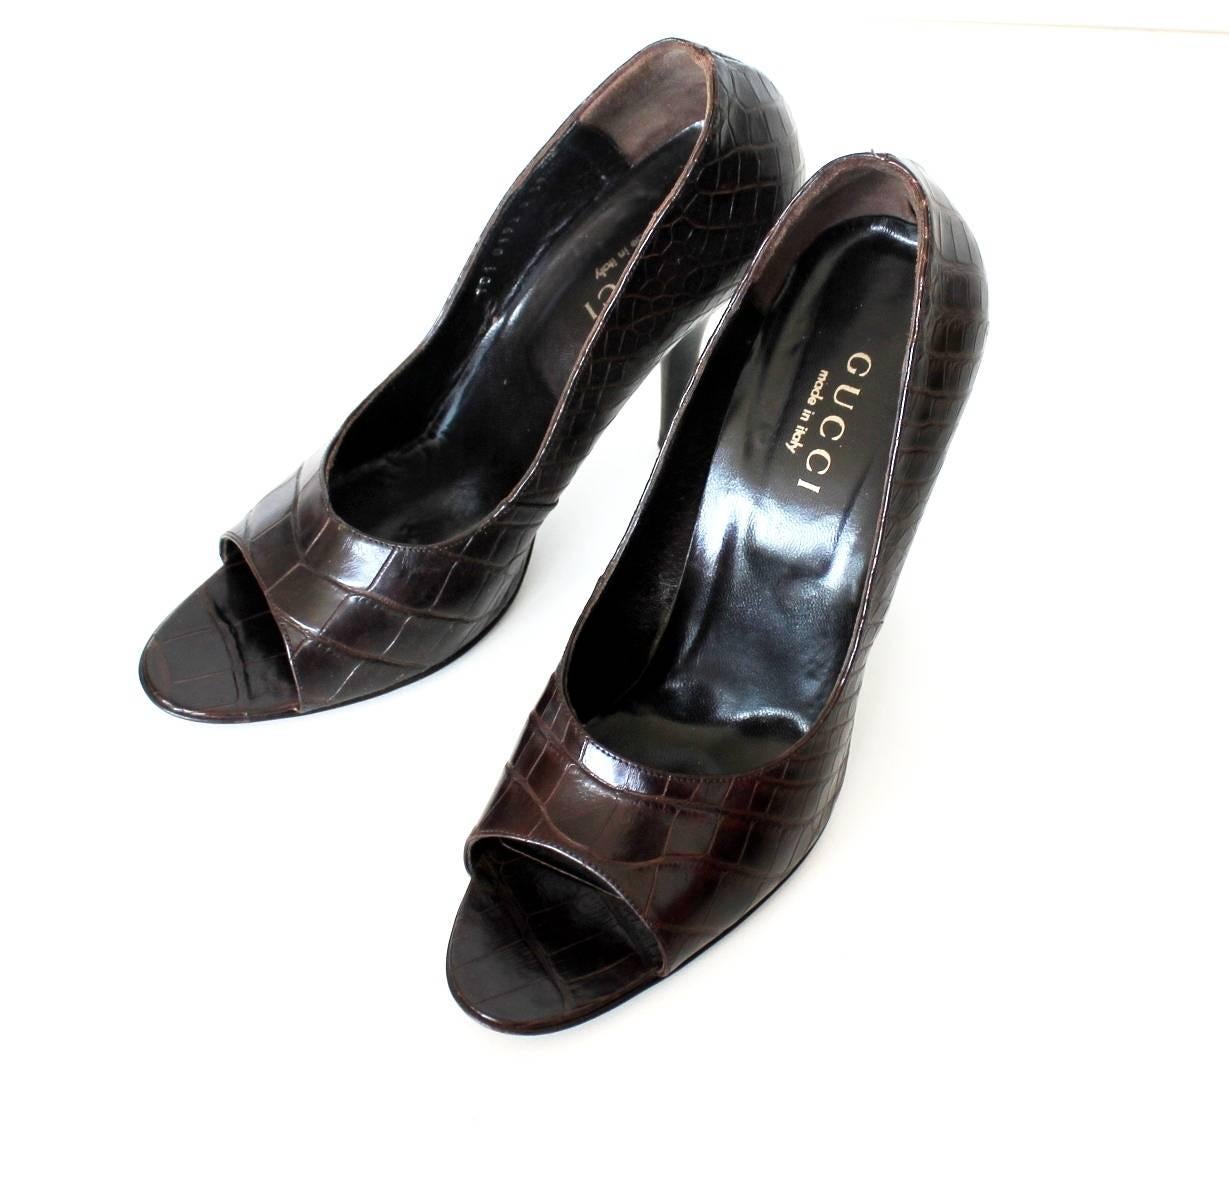 Black NEW Gucci Exotic Chocolate Brown Alligator Skin High Heel Peep Toes Sandals 39.5 For Sale